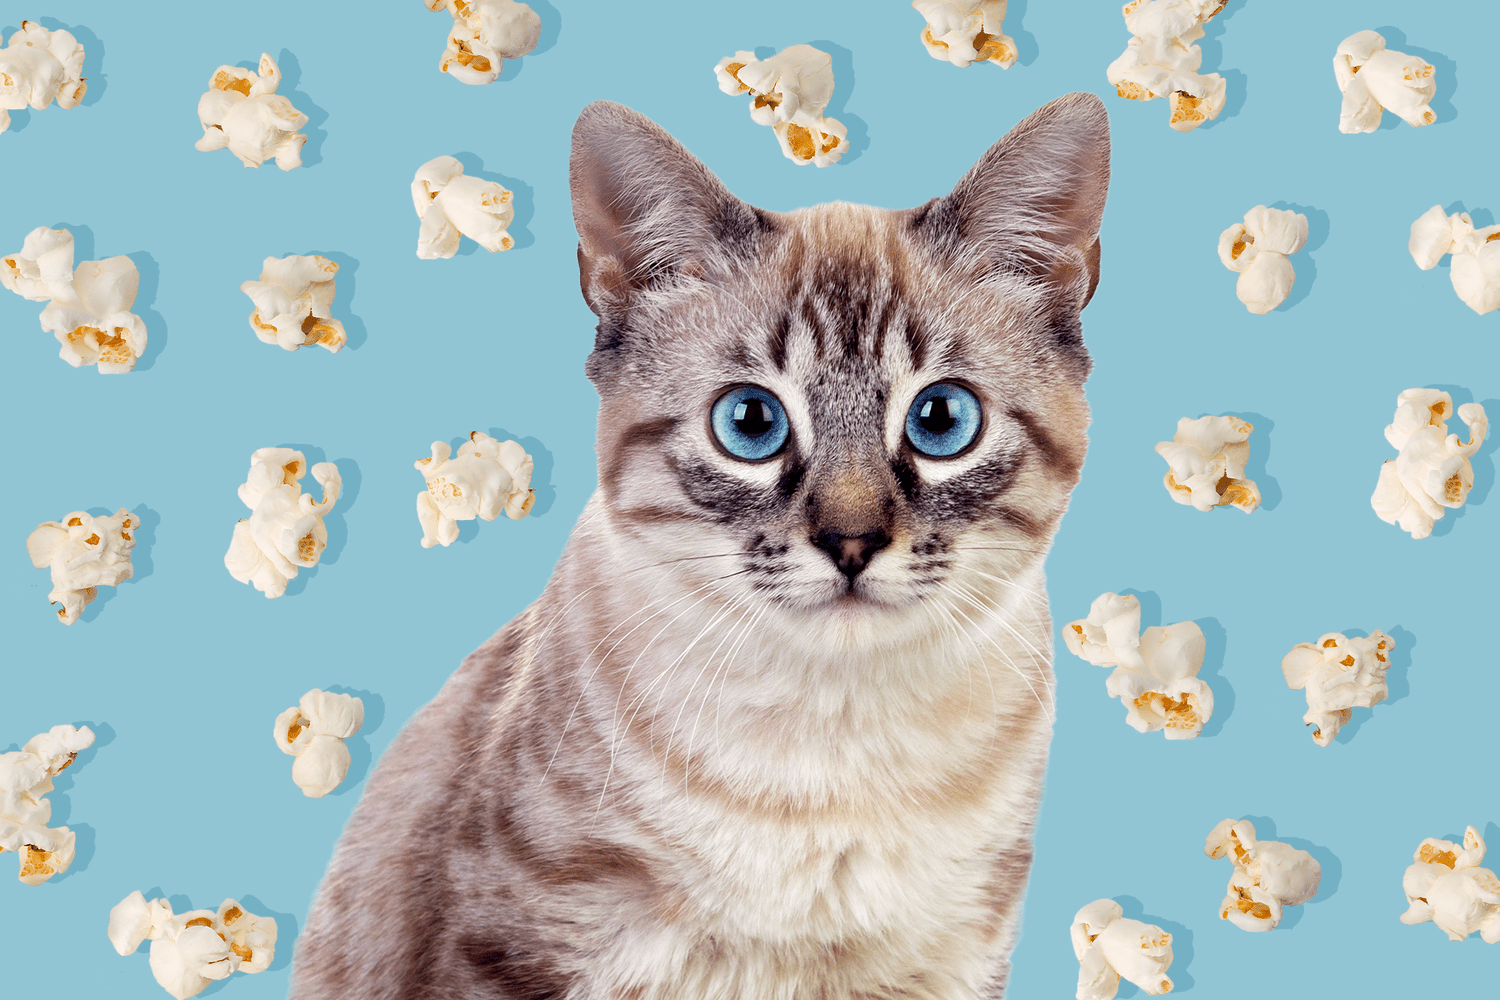 cat with background of popcorn; can cats eat popcorn?